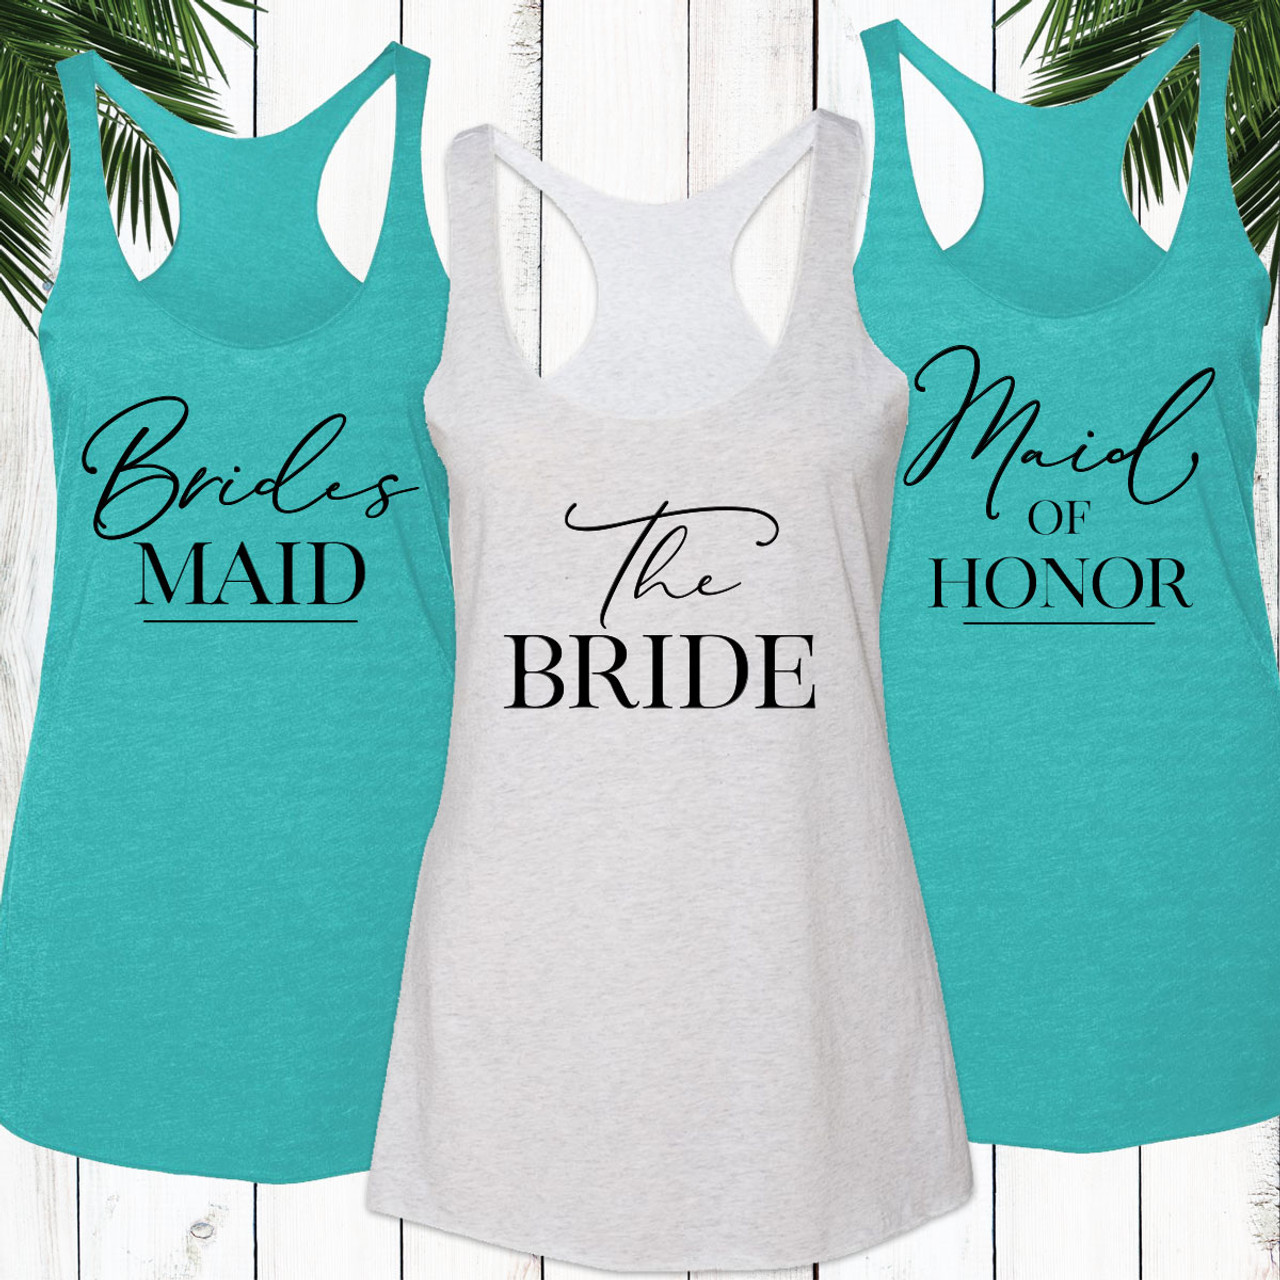 Awkward Styles Bride Squad Tops for Bachelorette Party Racerback Bride Tank Tops Bride Squad Tanks Bride BFF Gifts for Bridesmaid Tops Bride Crew